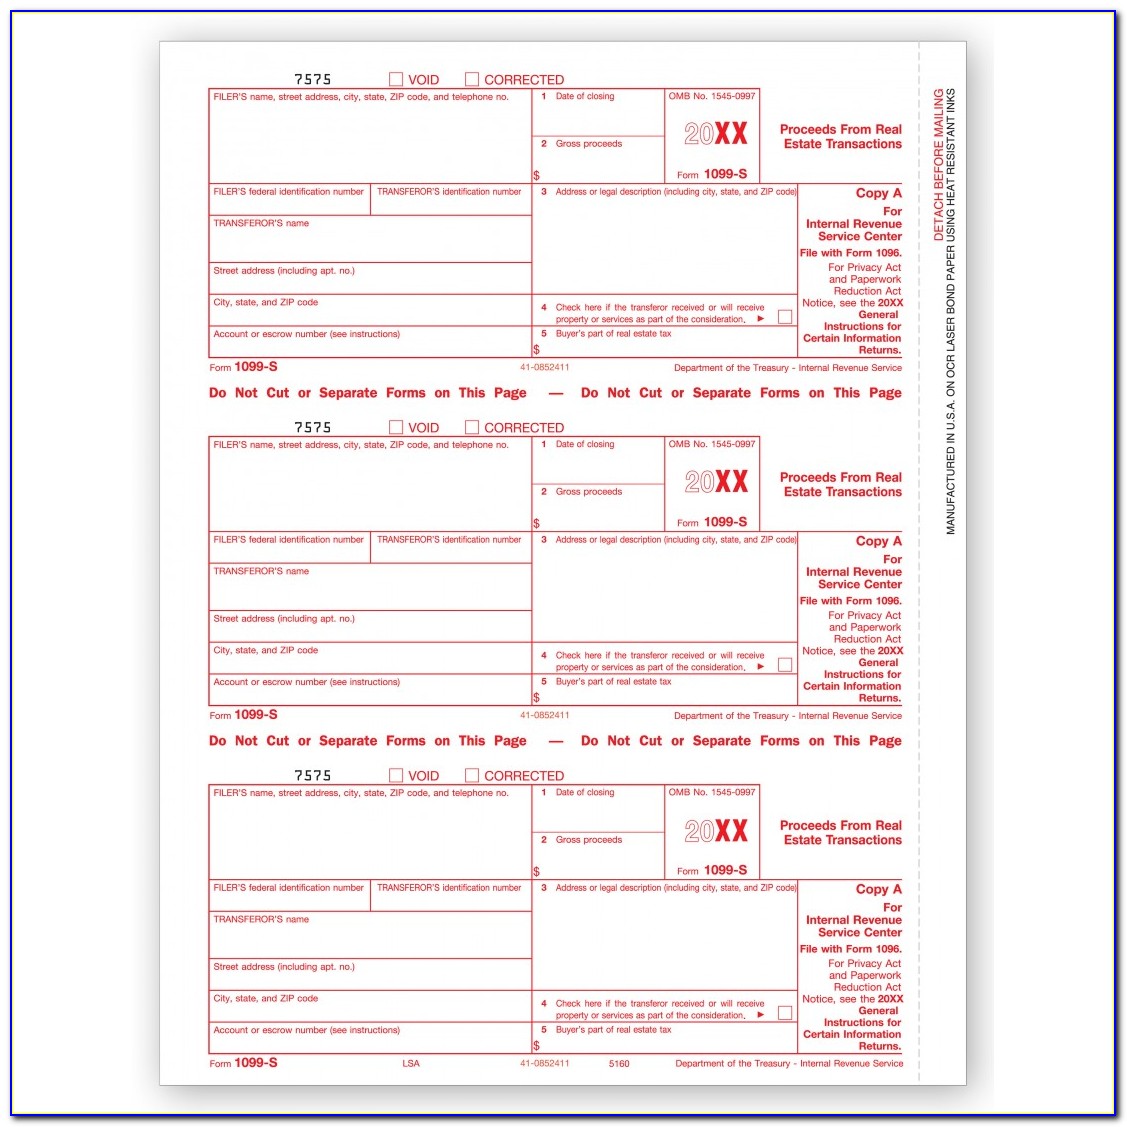 Irs.gov 1099 Misc Forms